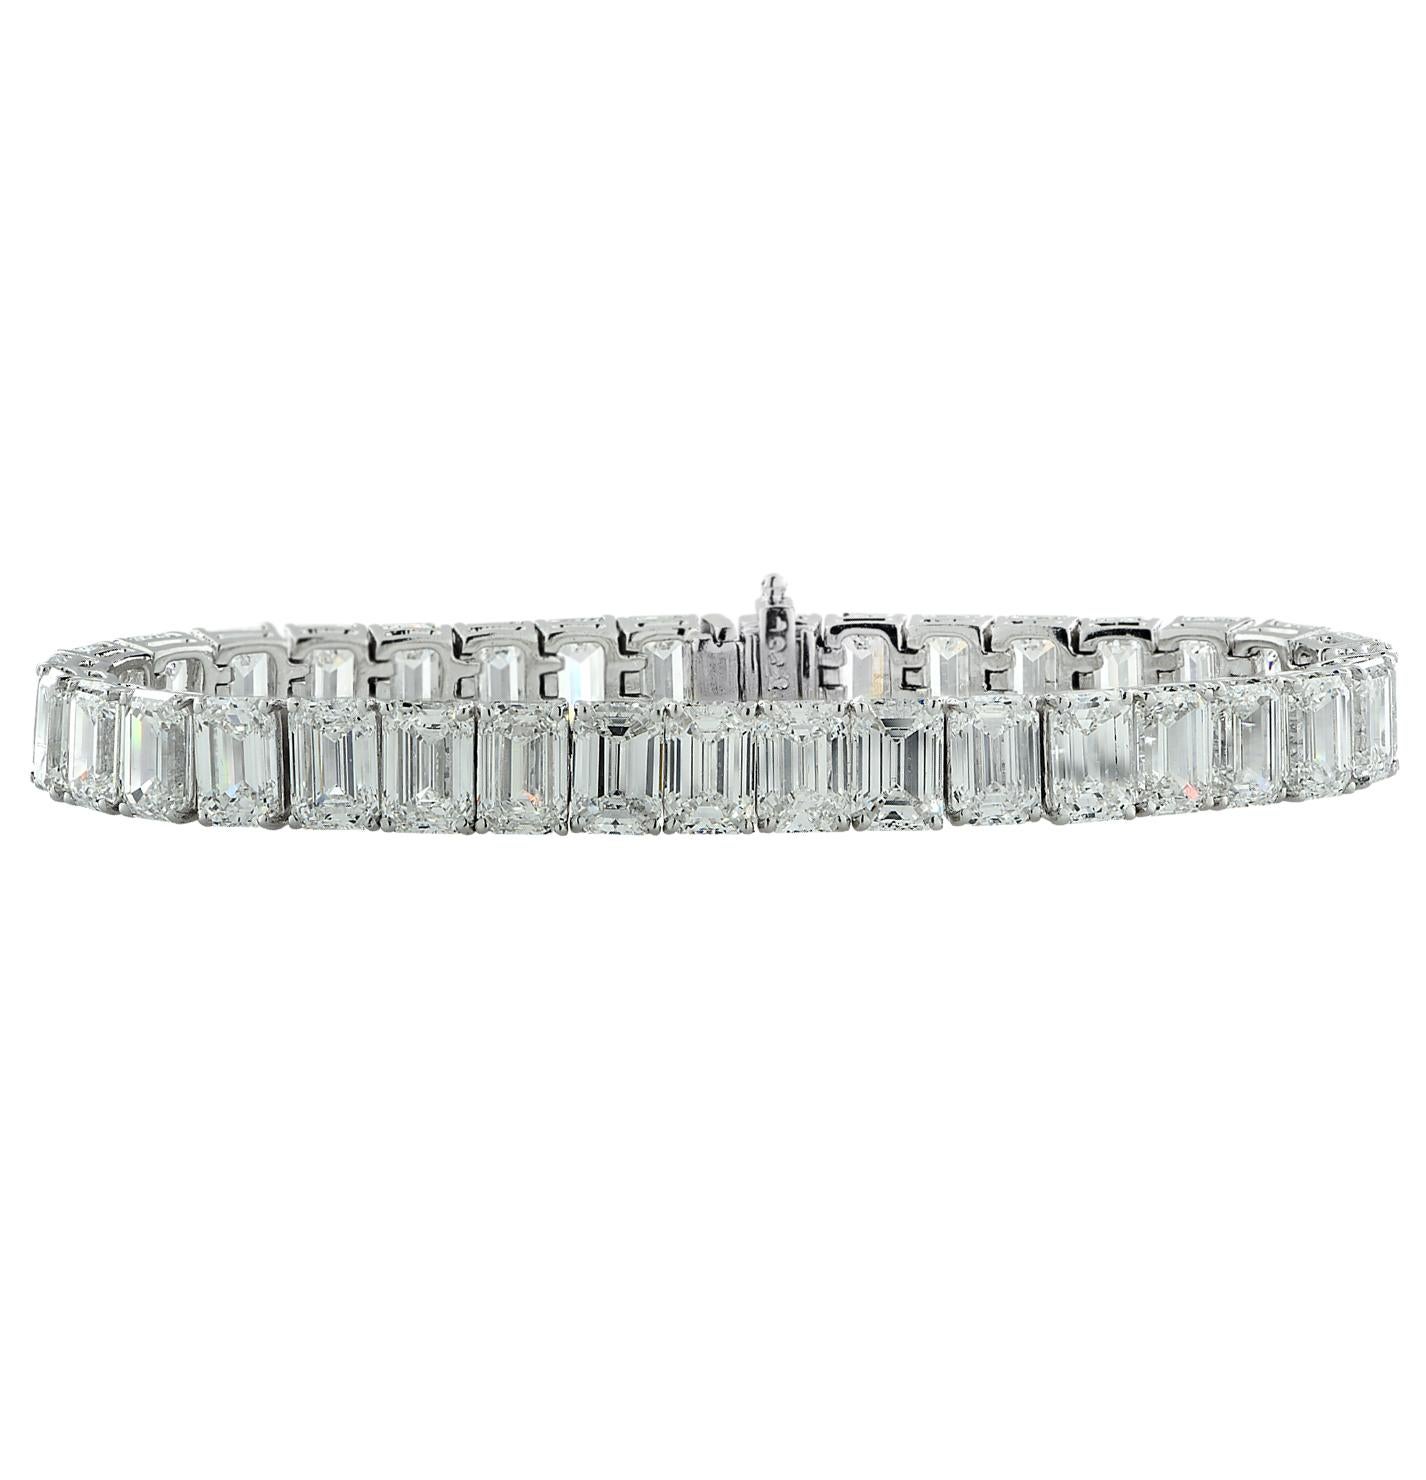 Spectacular bracelet crafted in platinum, featuring 35 sensational GIA certified emerald cut diamonds weighing 35.28 carats total, D-F color, IF-VS clarity. Each GIA certified diamond was carefully selected, perfectly matched and set in an endless